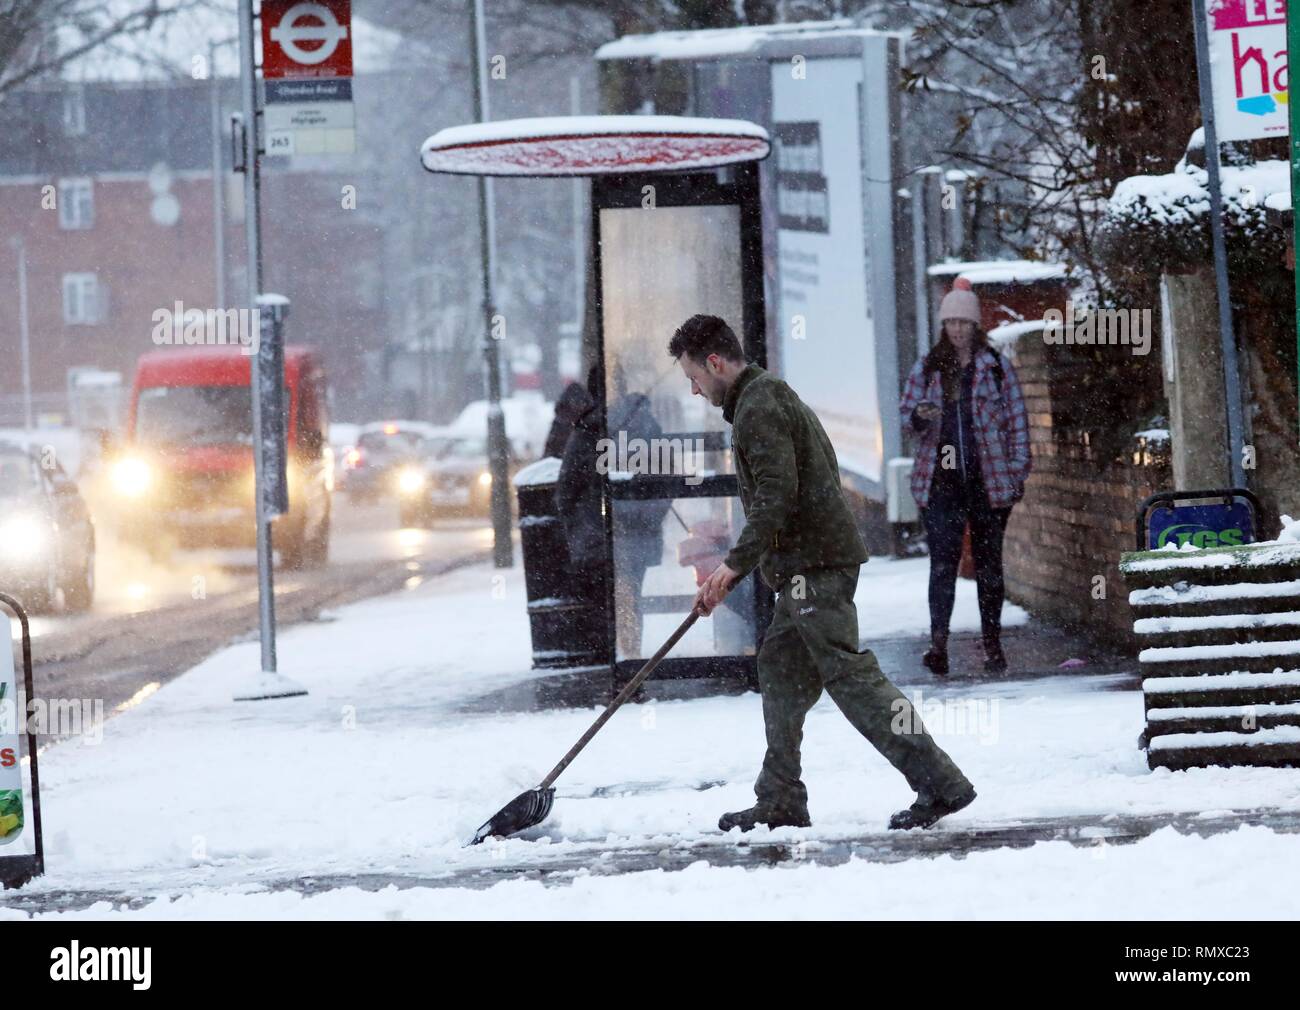 Pic shows: Snow and sleet hampered commuters on their work today in East Finchley, North London  Clearing up outside his flower shop     pic by Gavin  Stock Photo